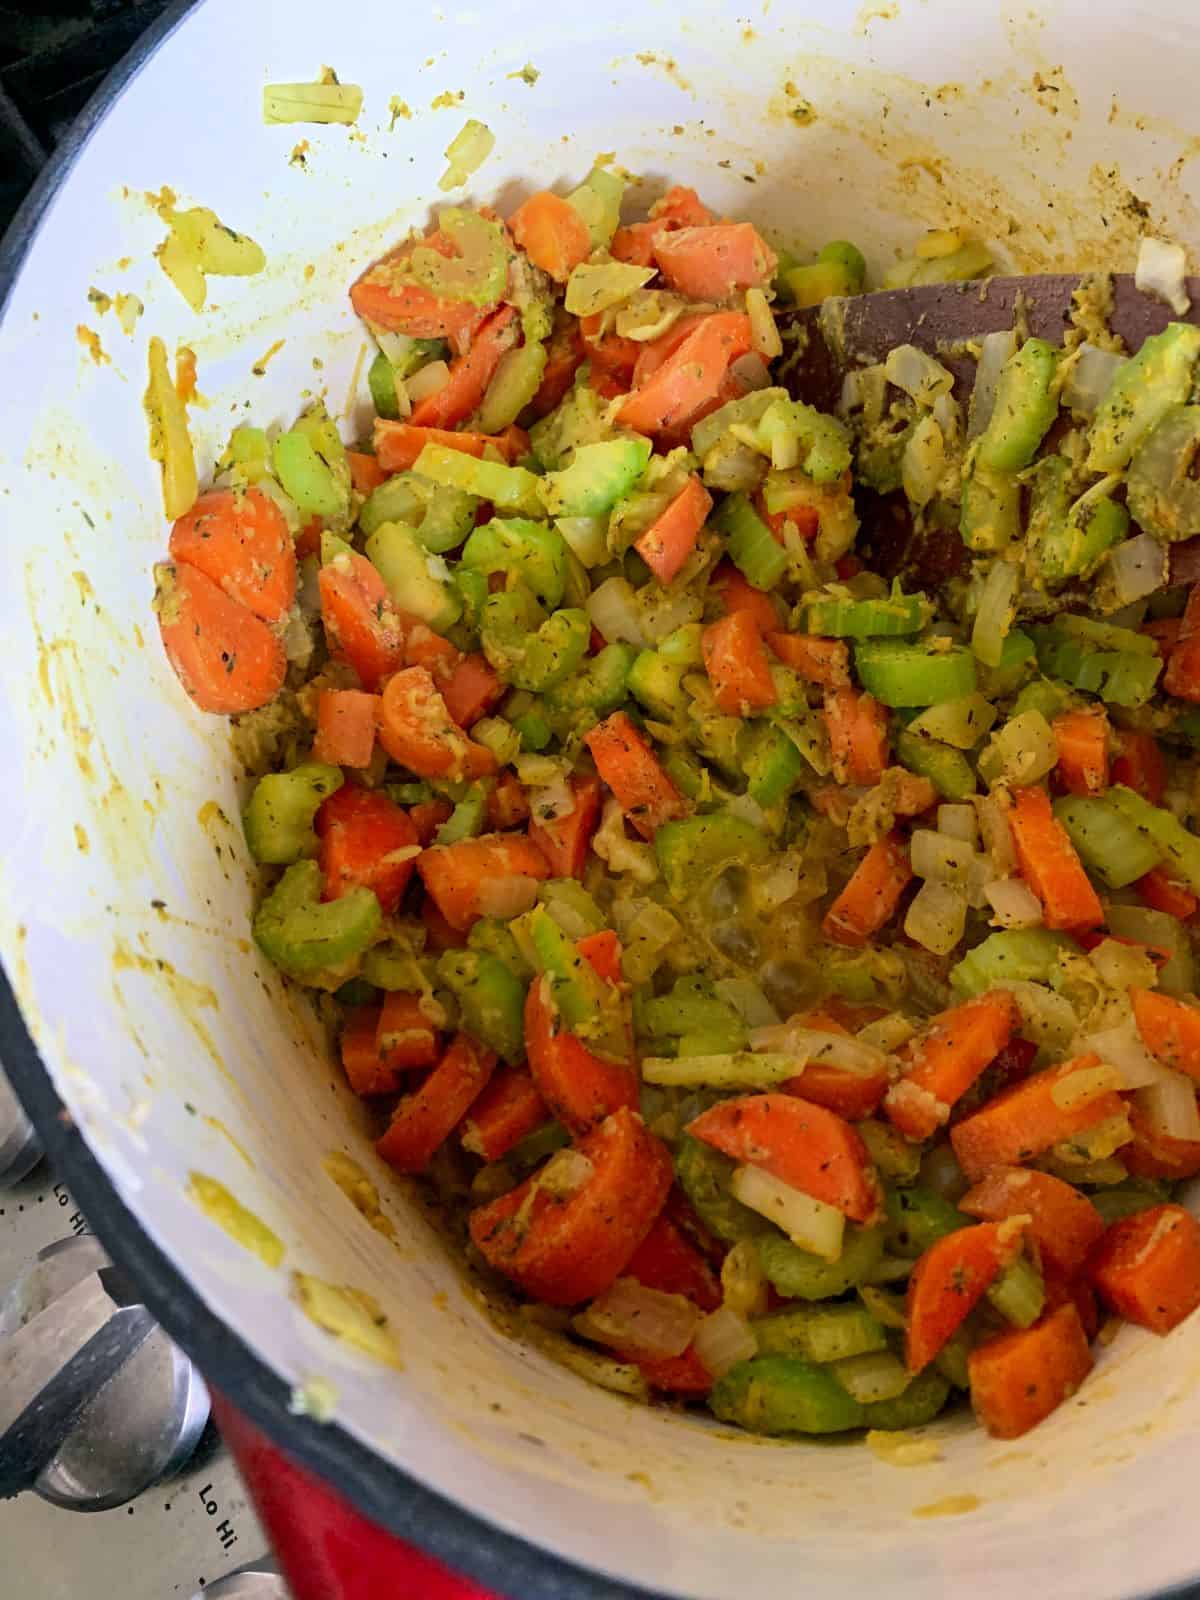 Mix sautéed veggies with spices and nutritional yeast.